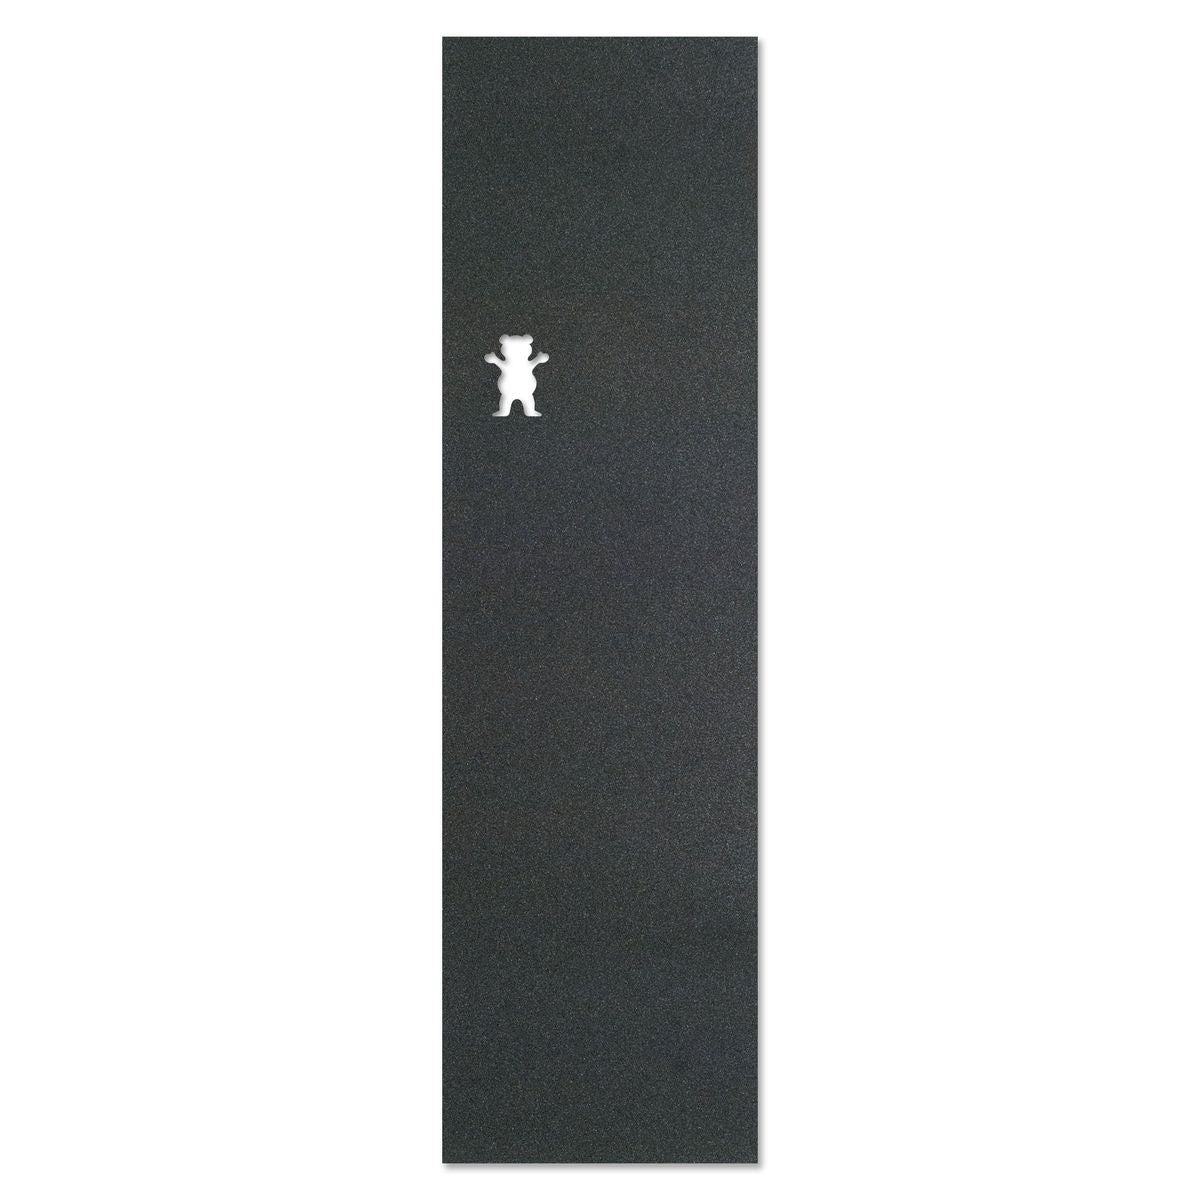 Grizzly Bear Cutout Goofy Grip tape - Black image 1